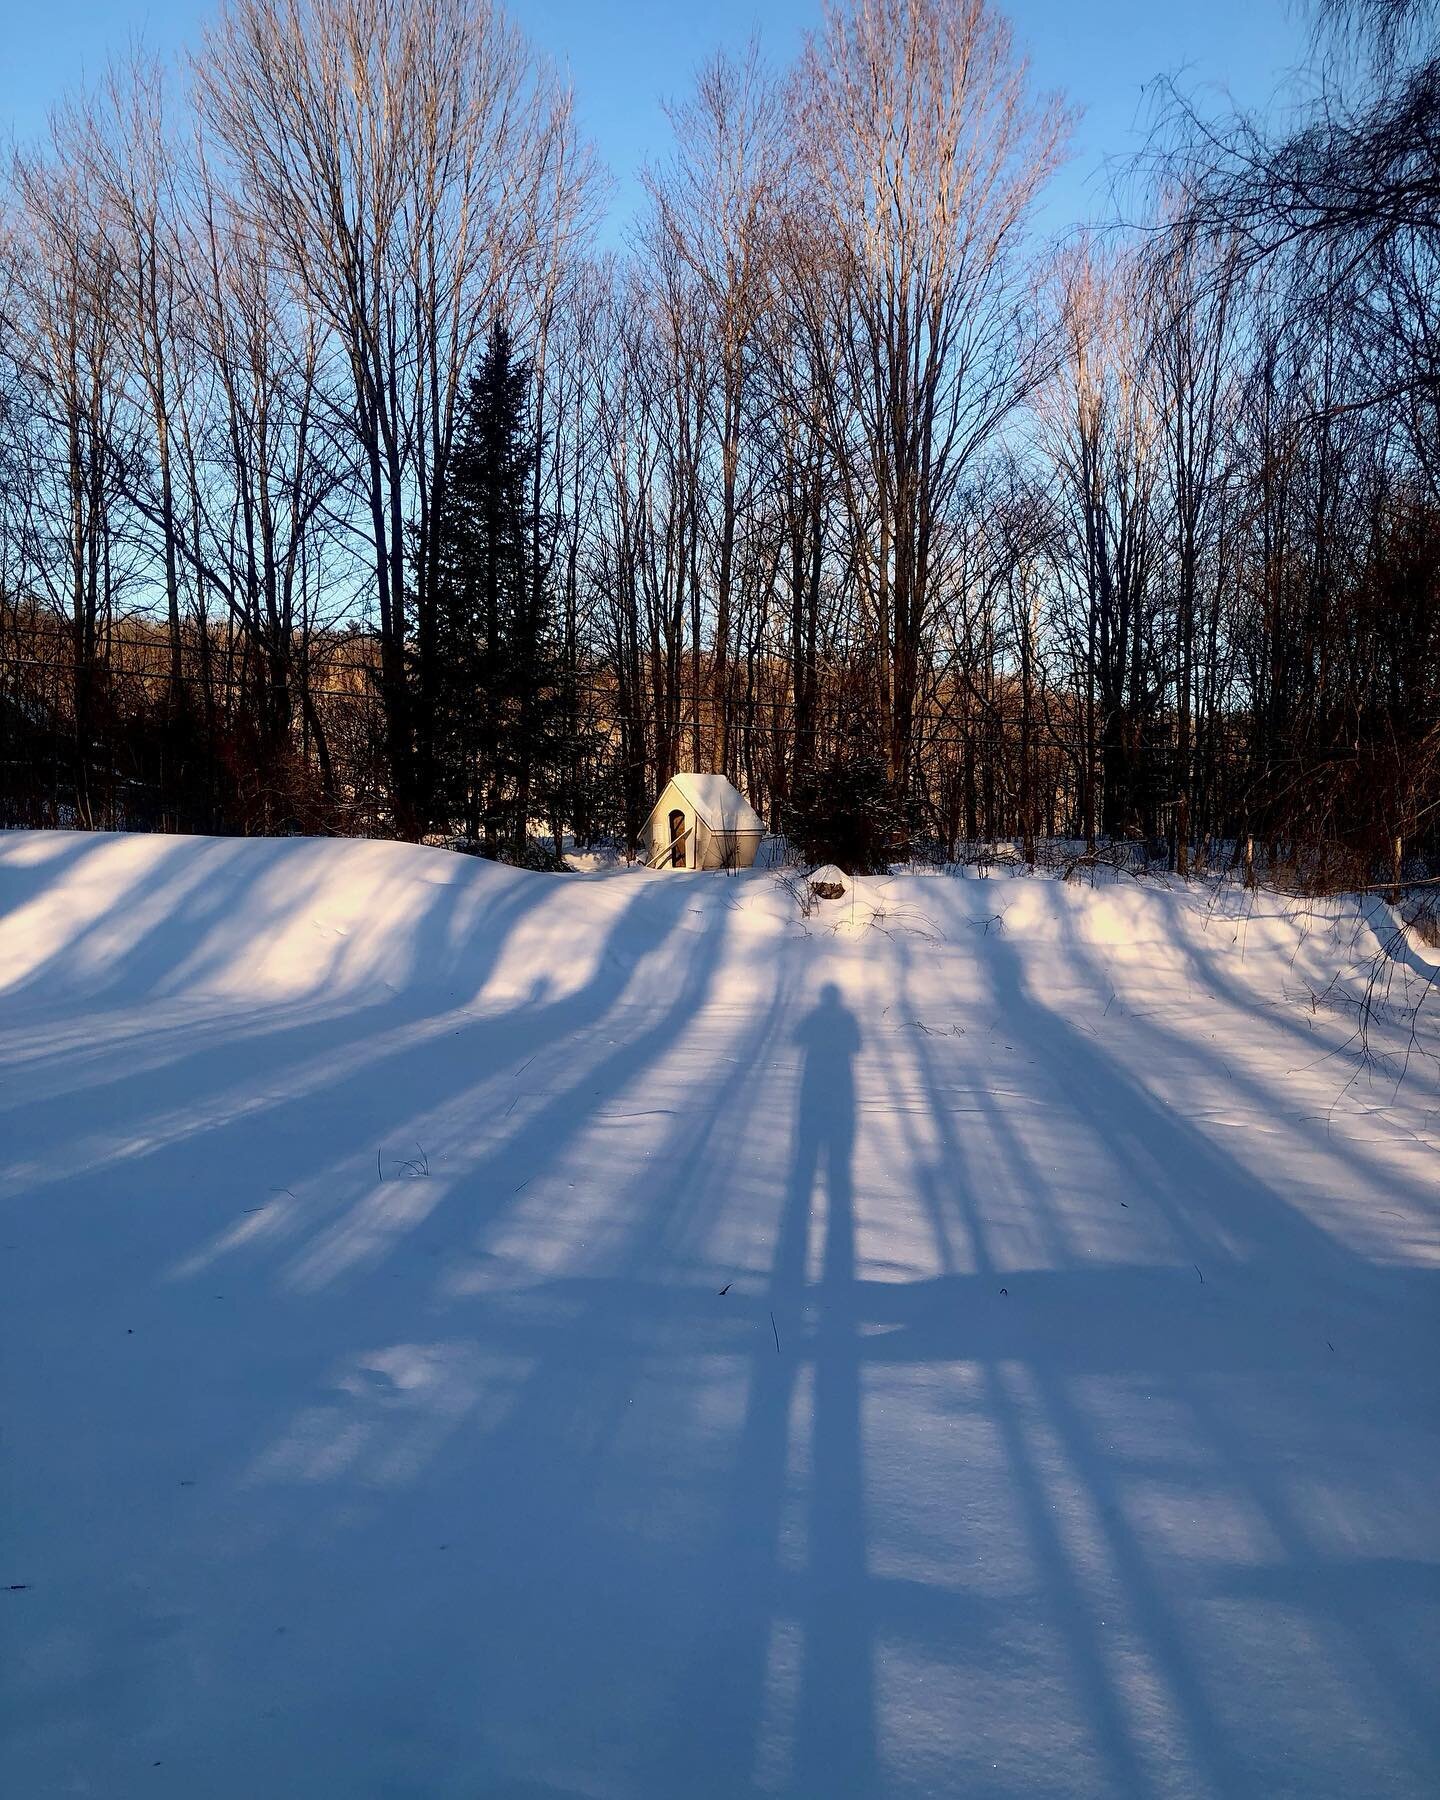 Long shadow coffee-walk in the back yard
#winter #snow #vermont